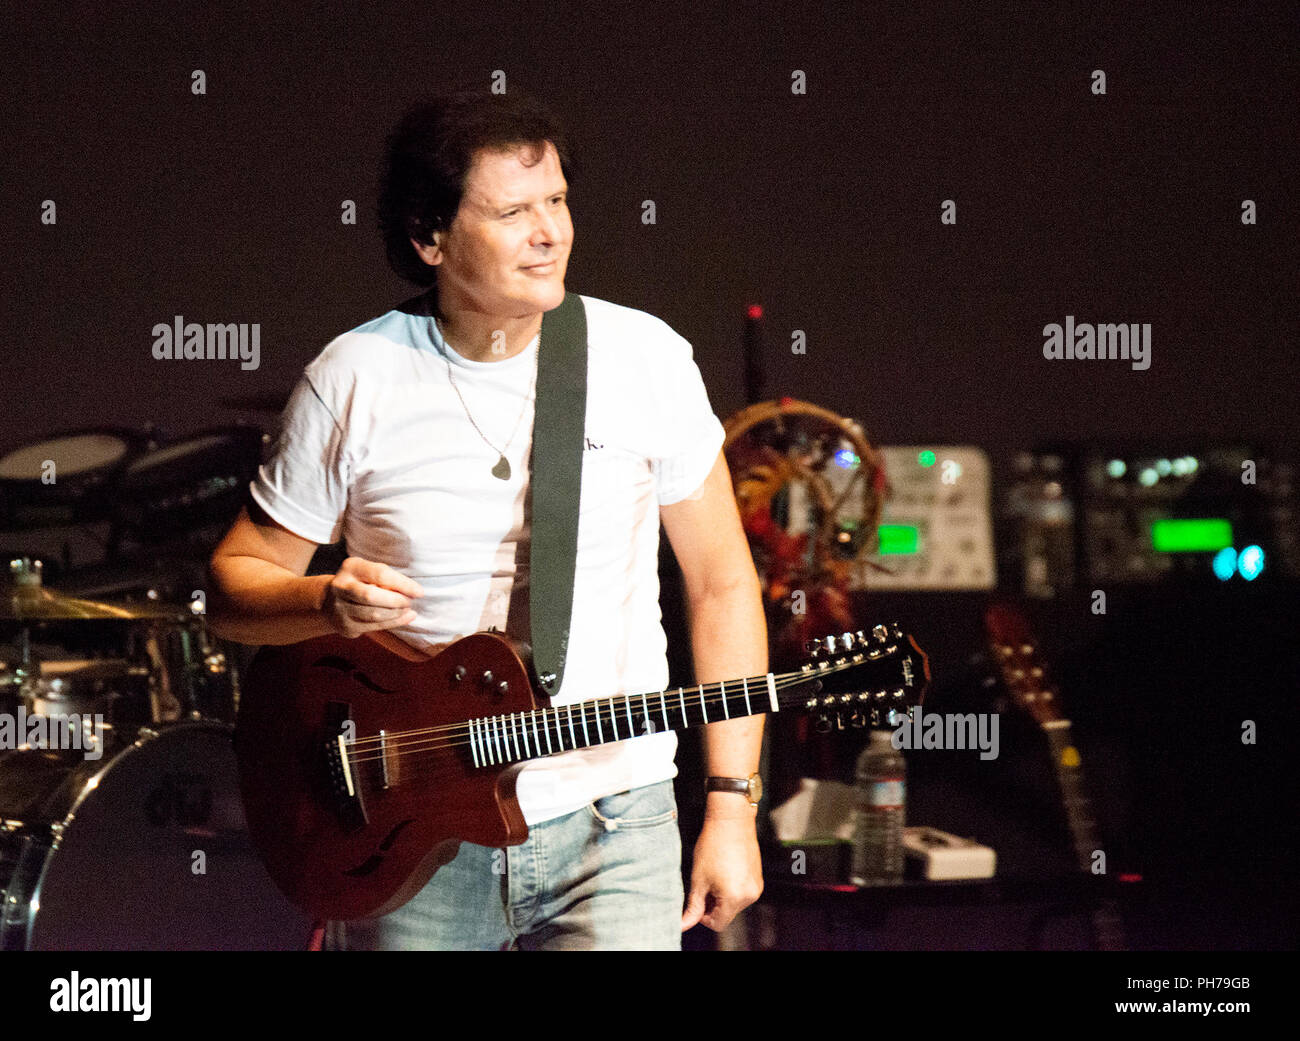 Los Angeles, California, USA. 29th Aug, 2018. TREVOR RABIN on stage with the iconic progressive rock band YES at The Greek Theater Credit: Scott Mitchell/ZUMA Wire/ZUMAPRESS.com/Alamy Live News Stock Photo